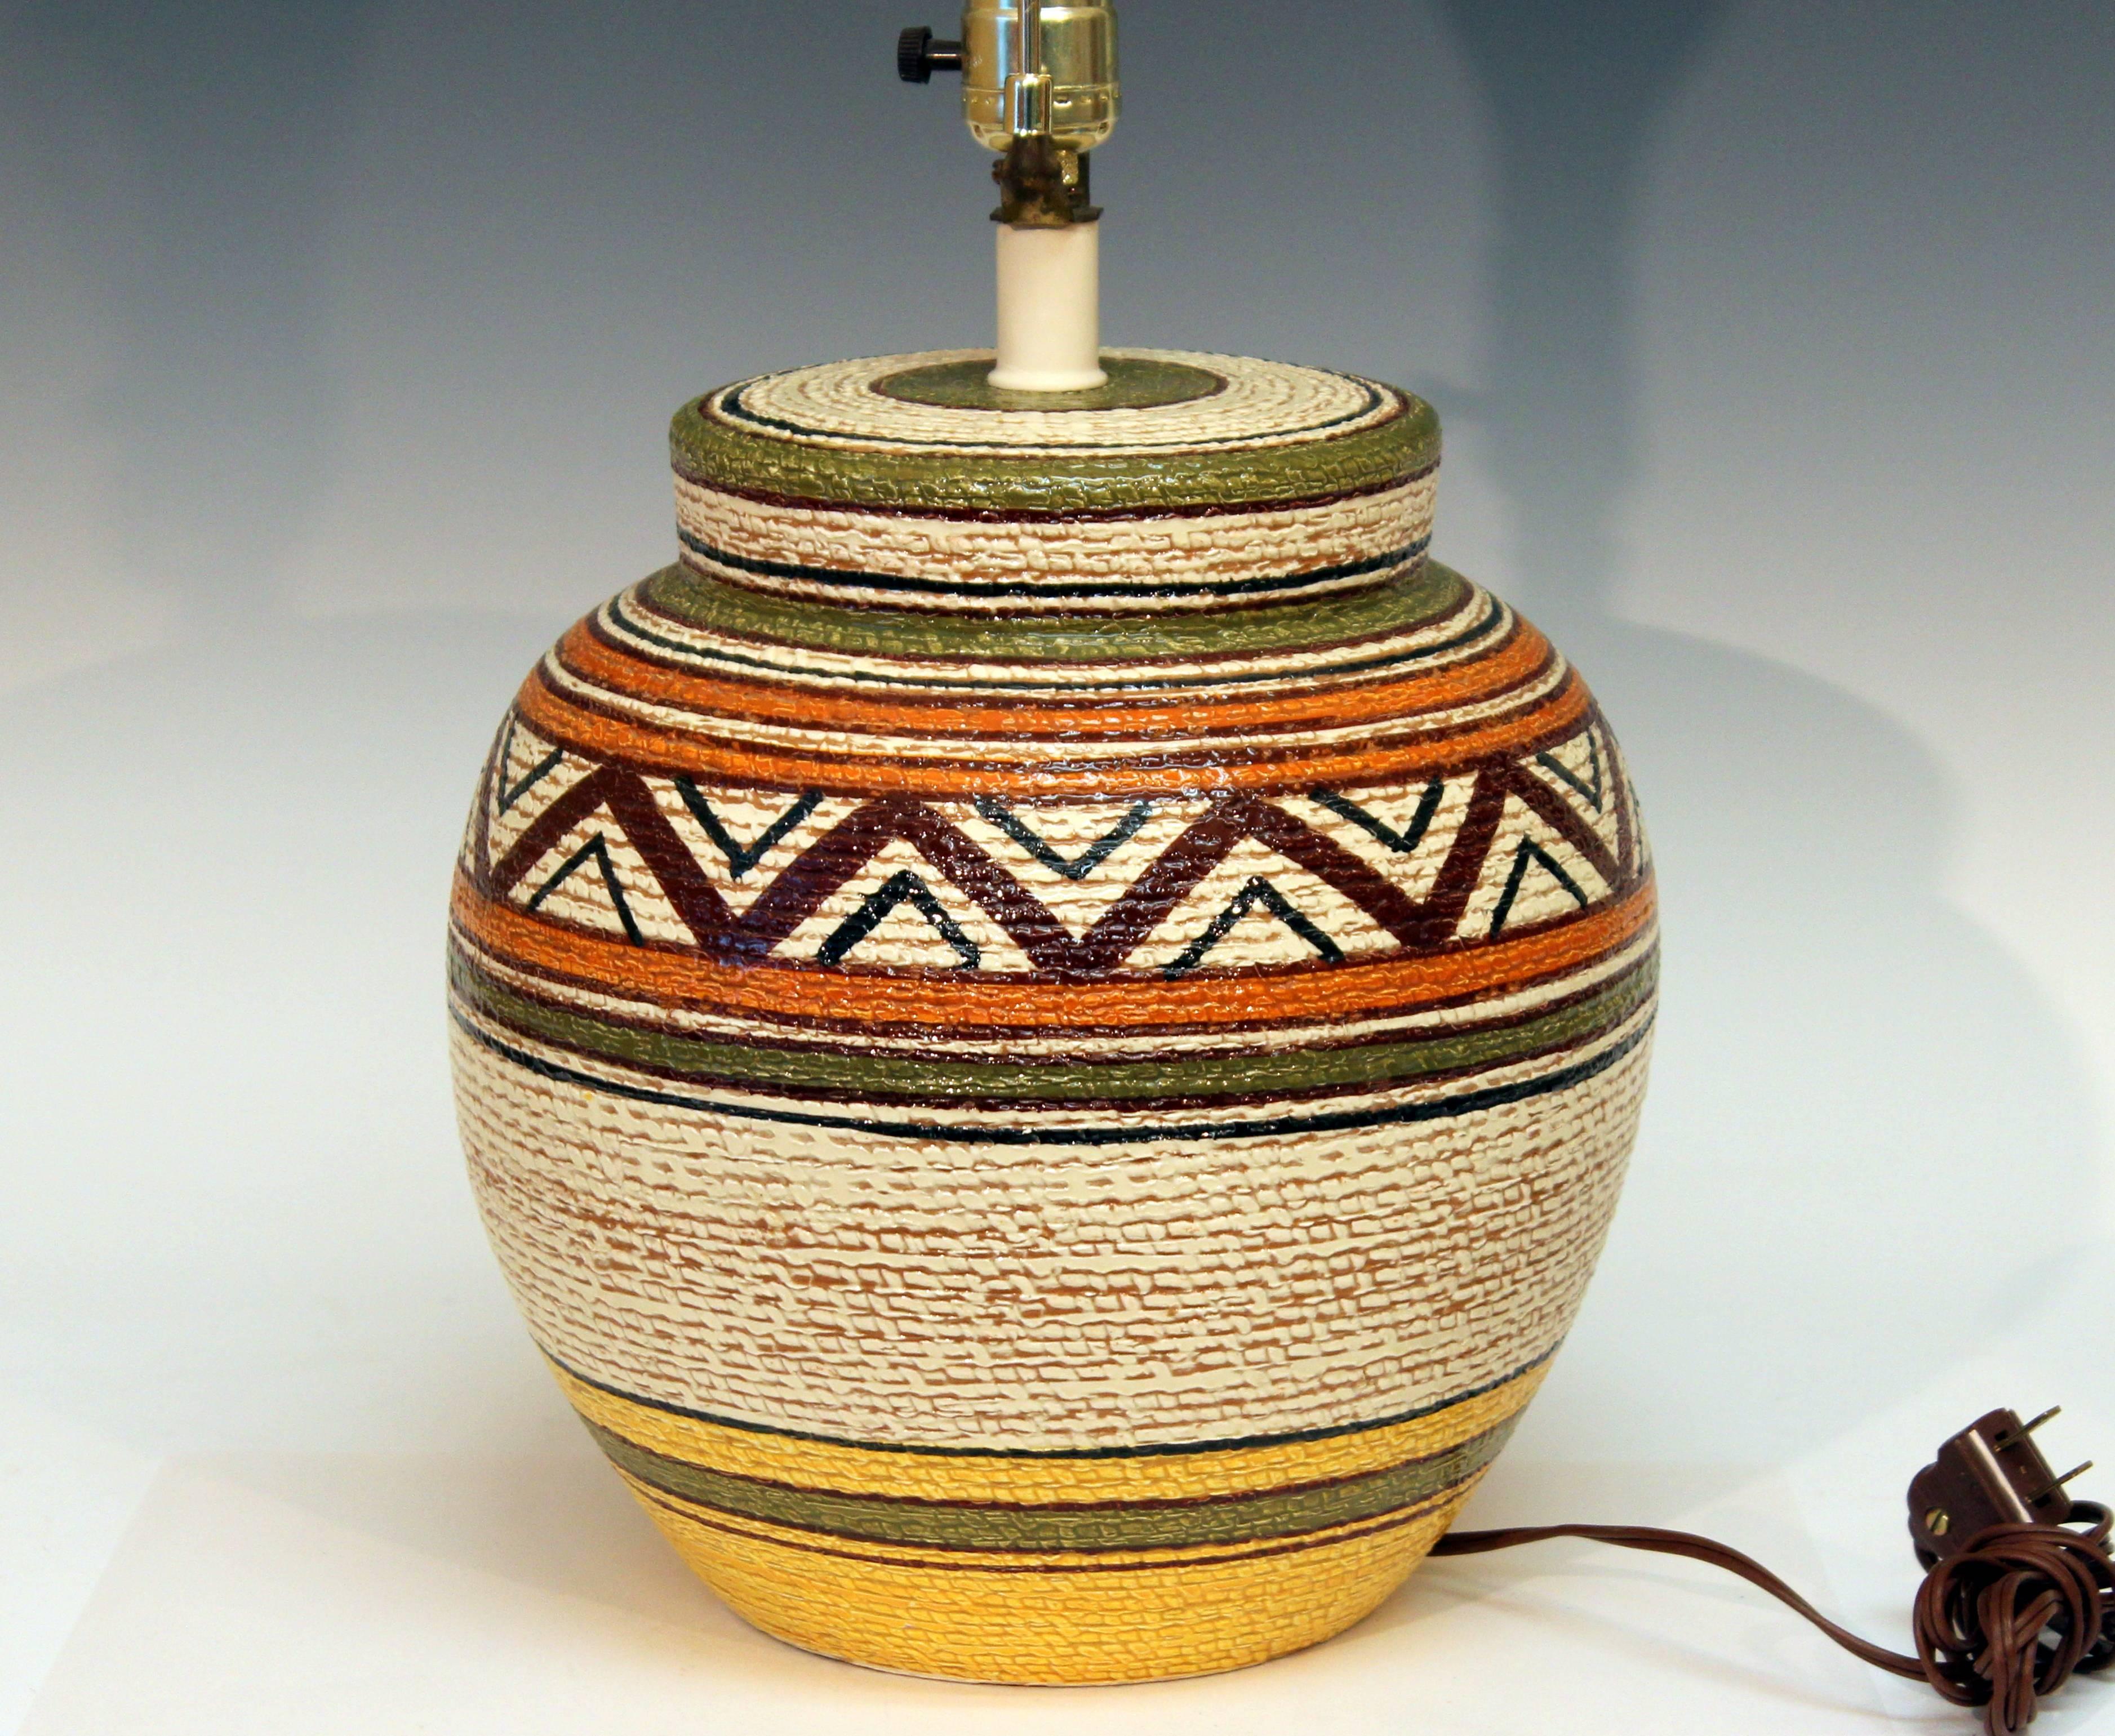 Big, heavy, hand-turned, vintage Bitossi lamp with earth colored glazes in geometric pattern over a basket weave ground, circa 1970. Measures: 23" high overall, 13" to base of socket, pottery only is 11" high, 11" diameter. Shade